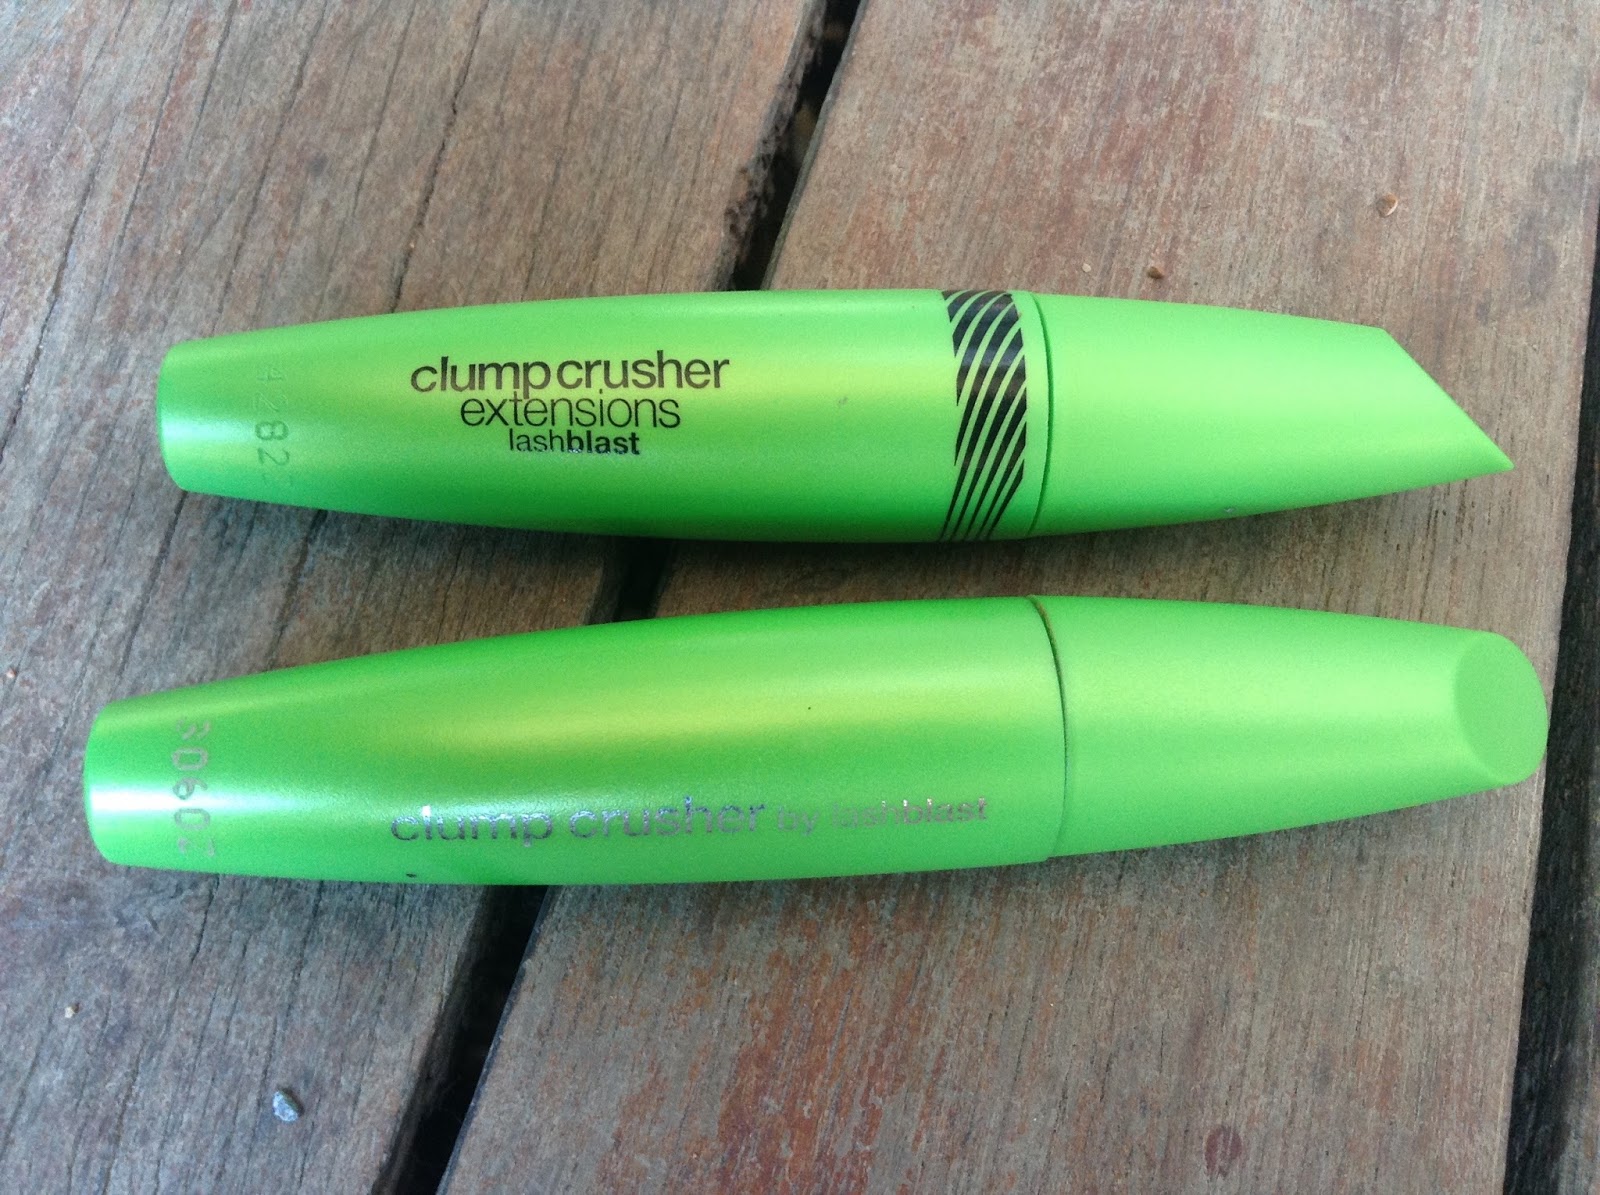 covergirl clump crusher extensions mascara review